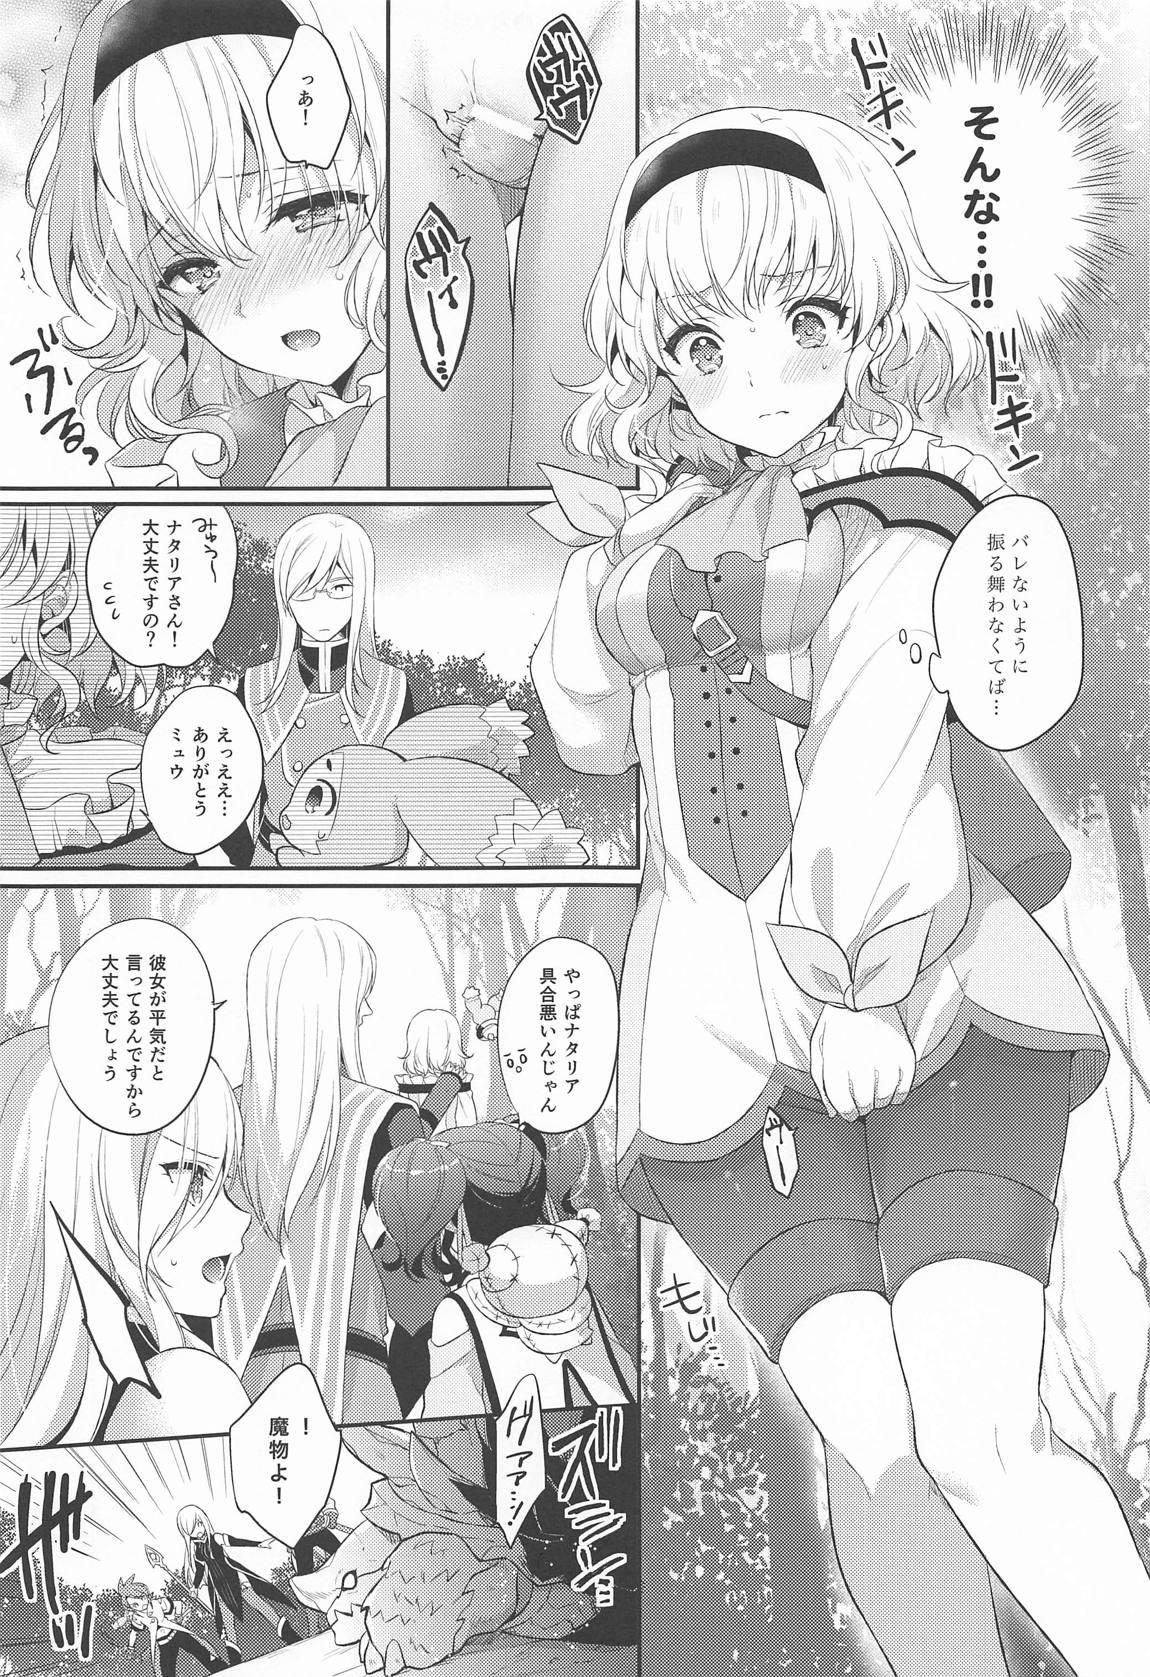 Chupada dolcemente - Tales of the abyss Adorable - Page 10